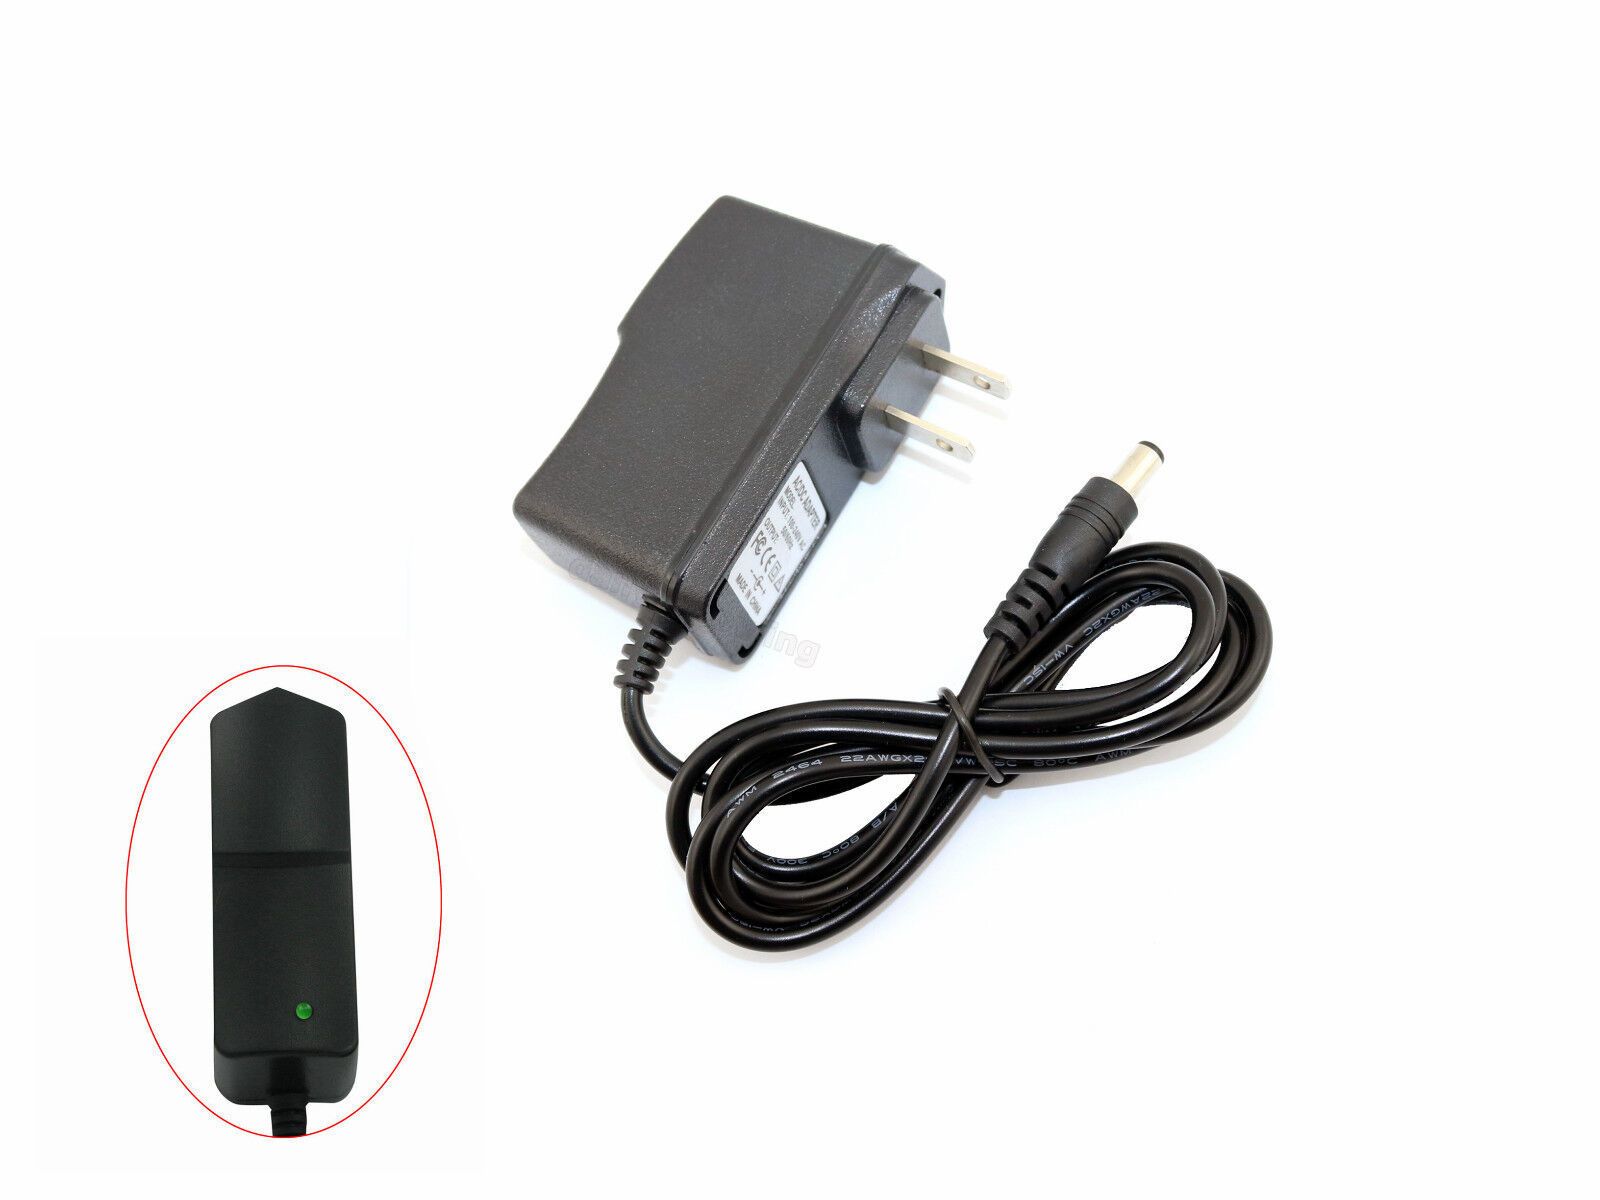  6V 2A AC/DC Adapter, Wall Charger, 5.5mm x 2.1mm & 2.5